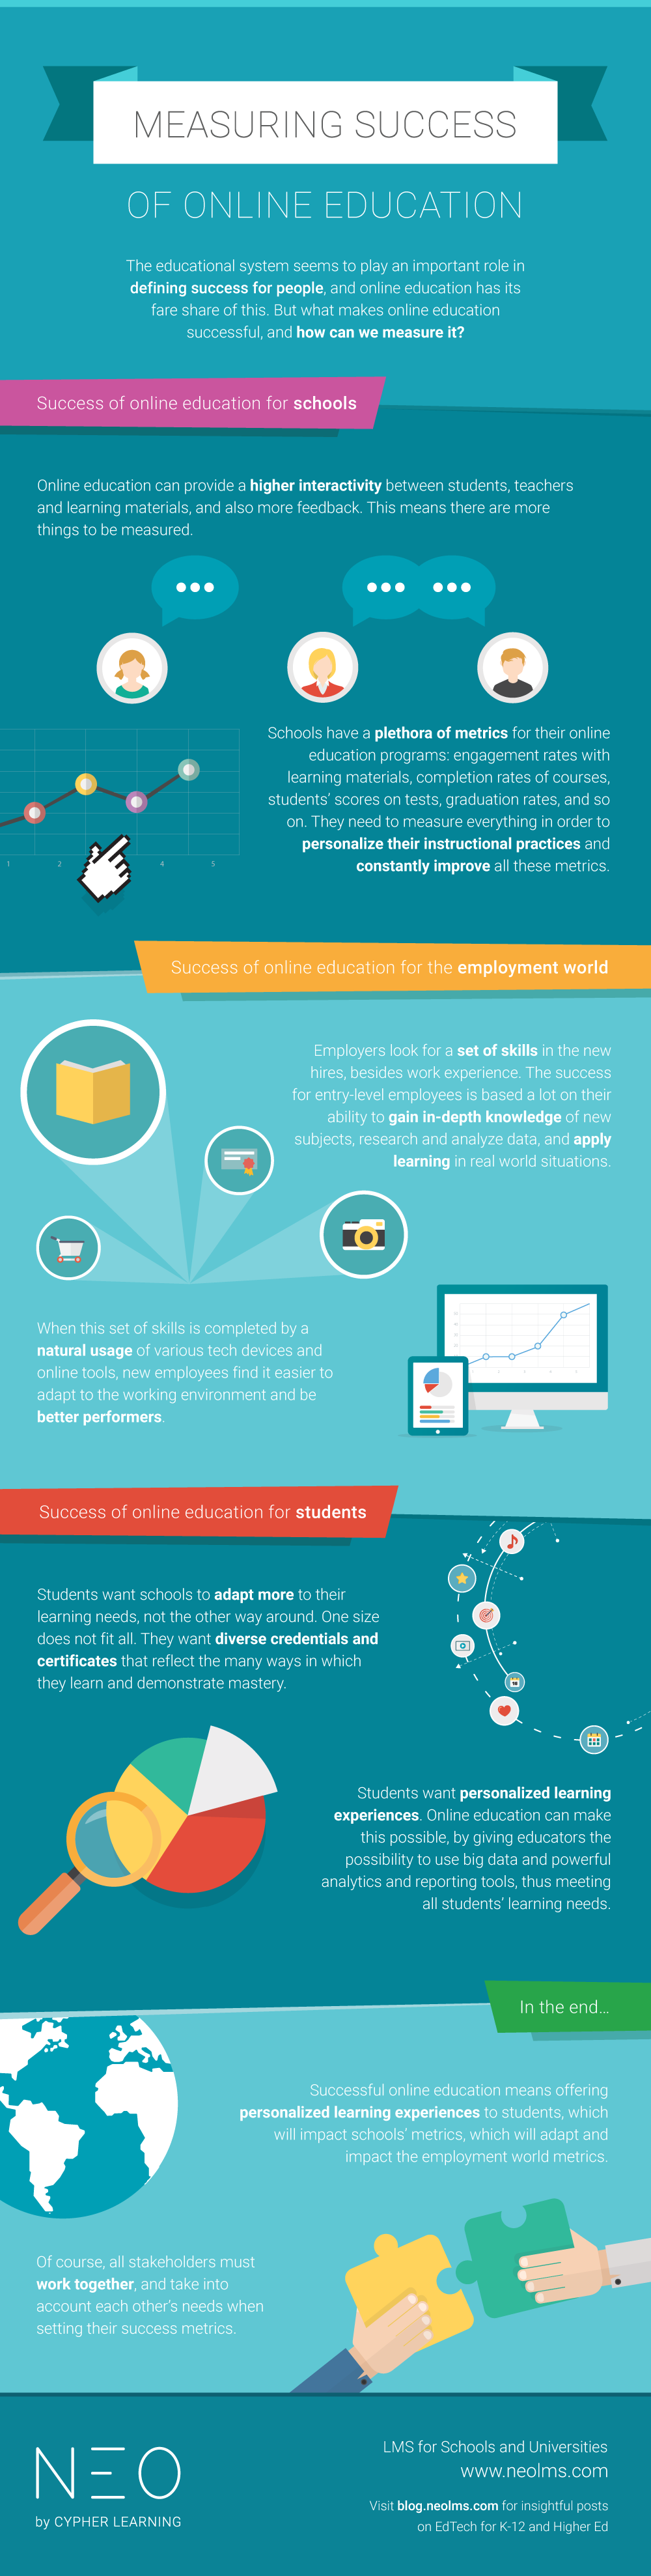 Measuring success of online education INFOGRAPHIC